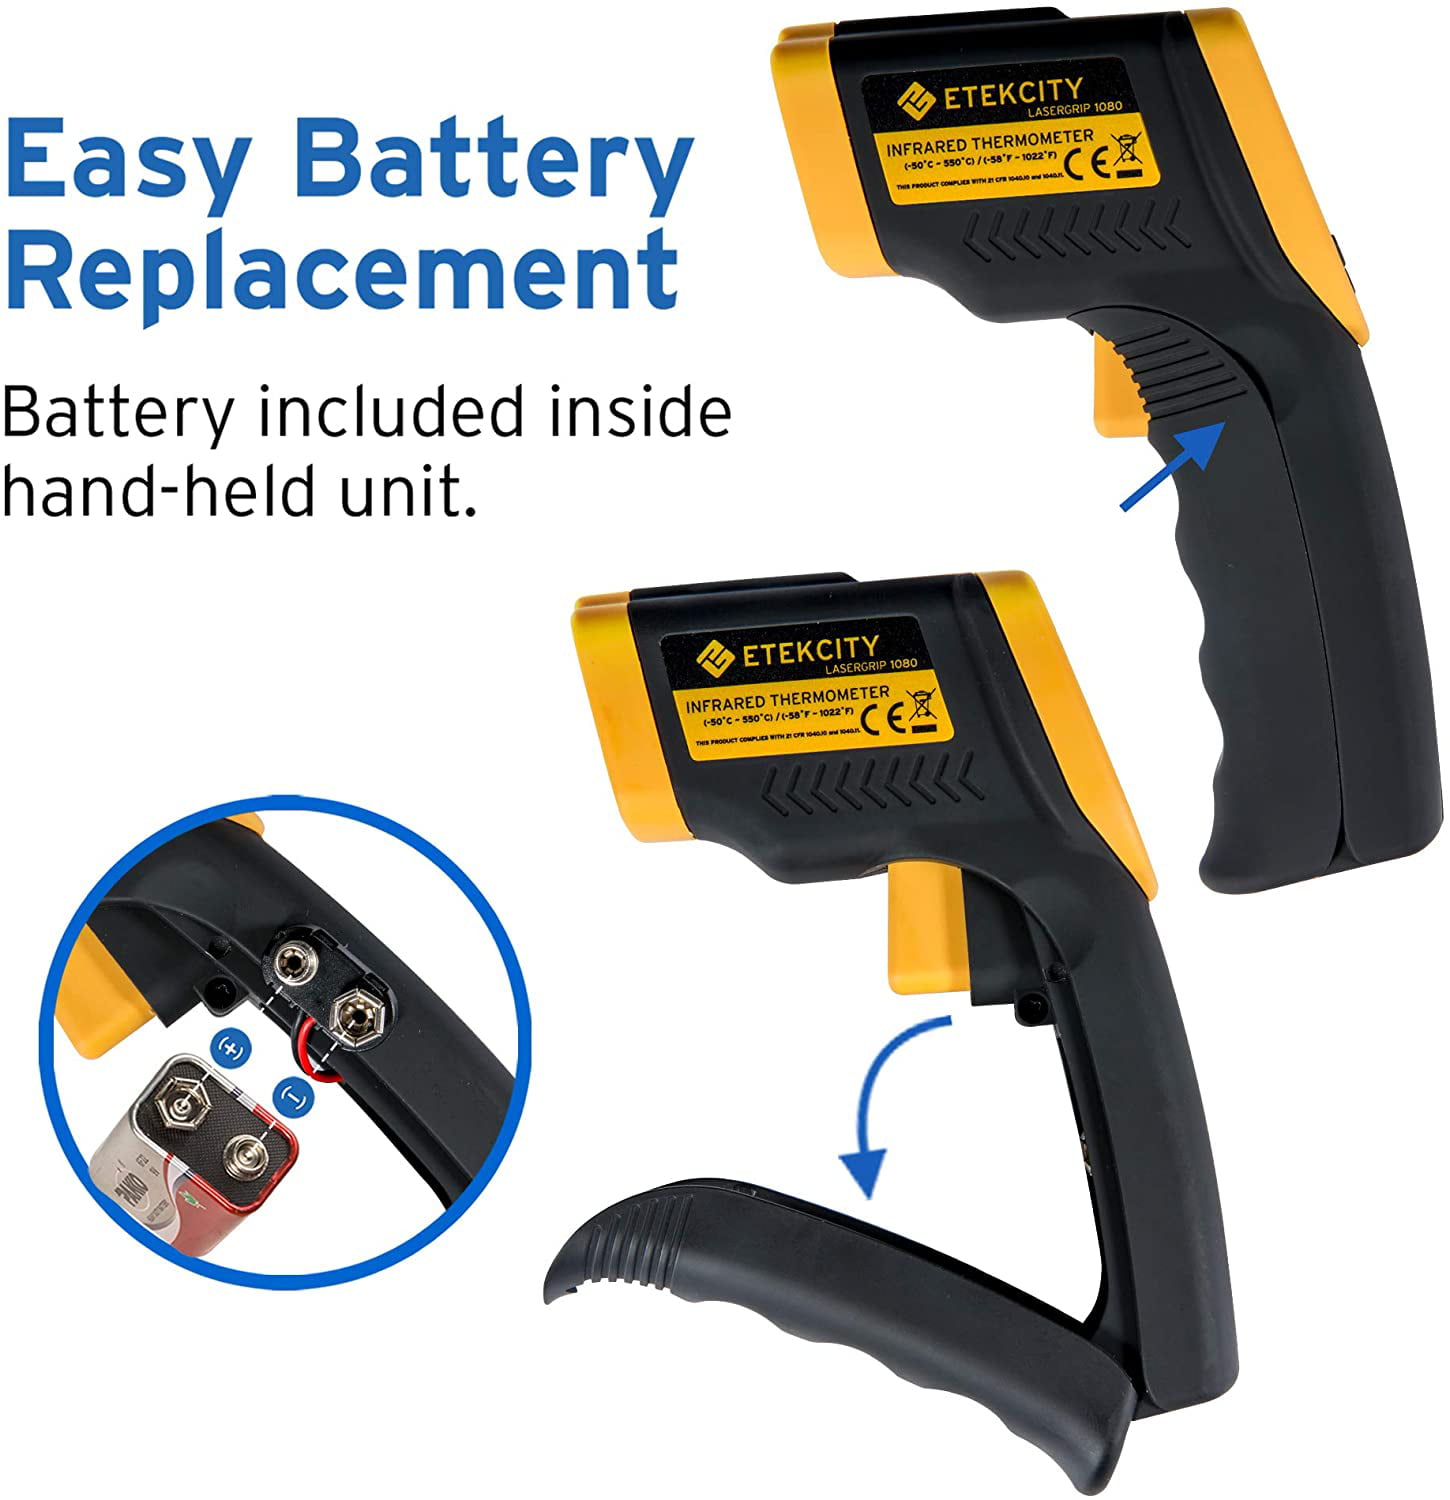 Get an Etekcity Lasergrip 1080 Non-Contact Infrared Thermometer for $17.09  Today - TechEBlog